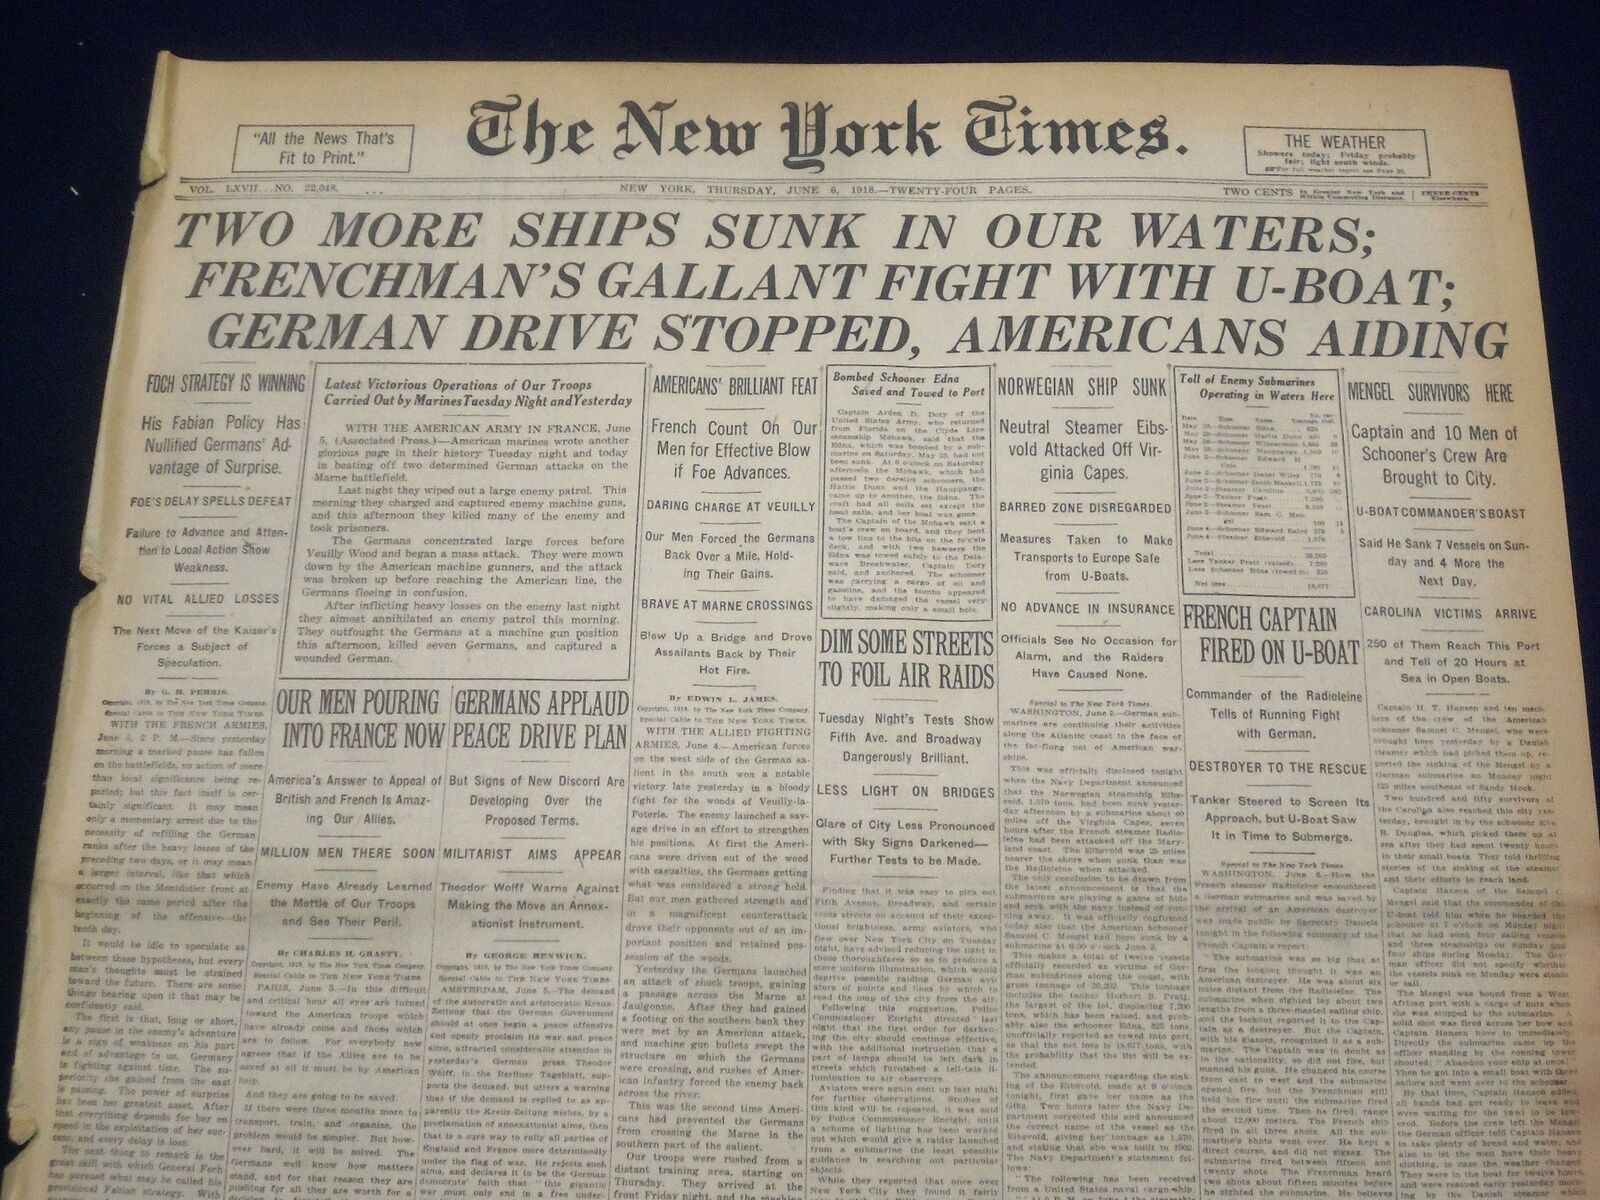 1918 JUNE 6 NEW YORK TIMES - TWO MORE SHIPS SUNK IN OUR WATERS - NT 9079